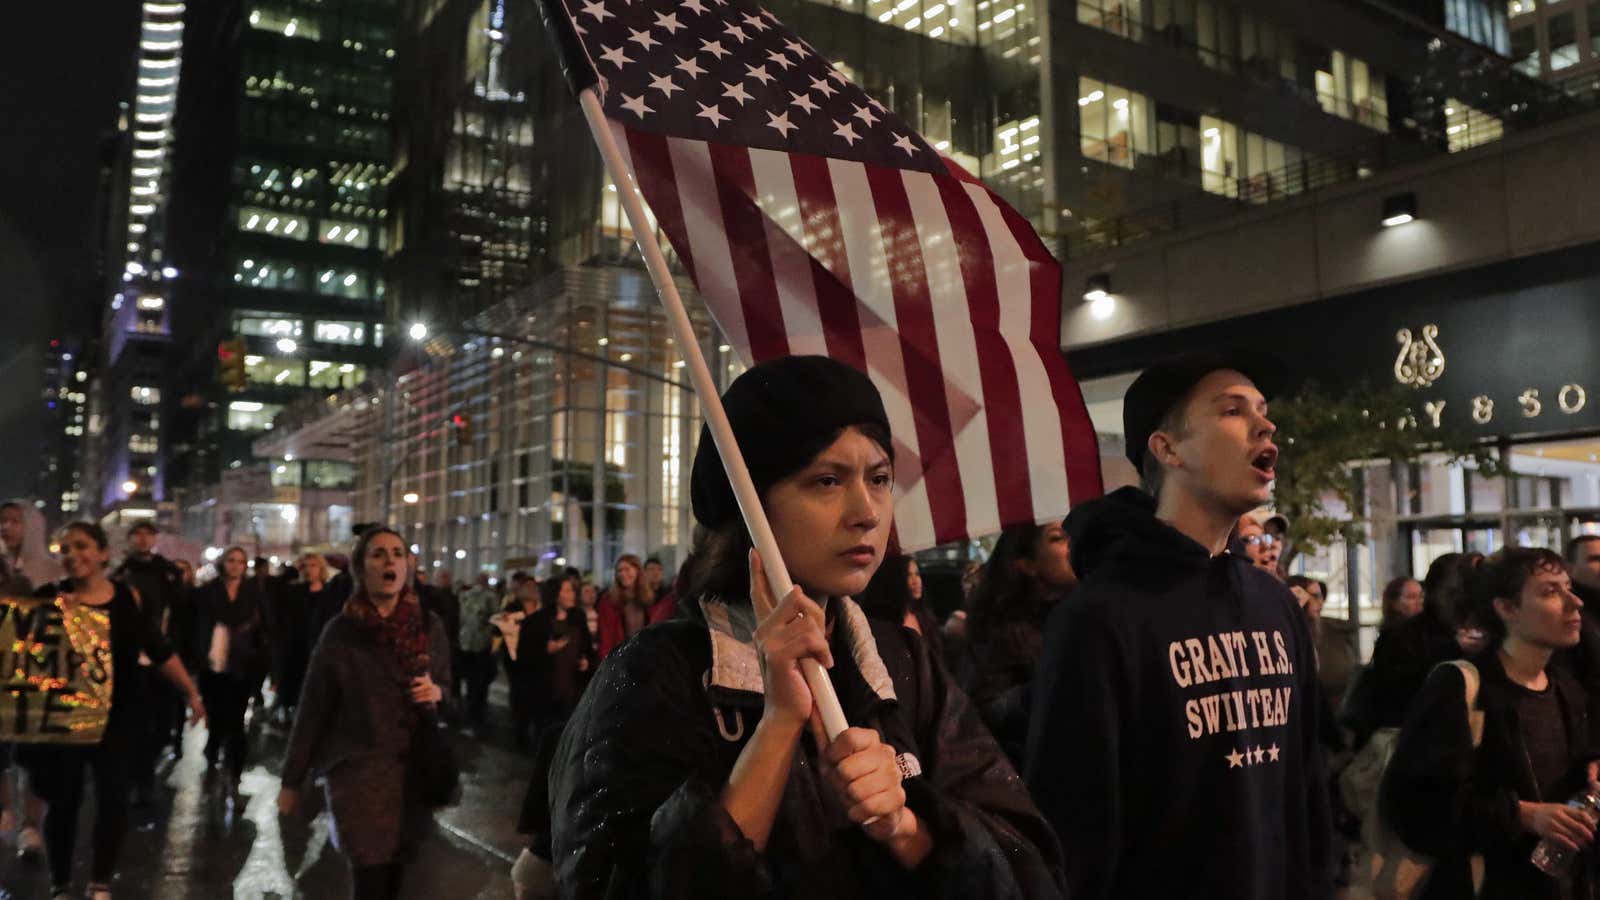 Protestors poured into the streets in Manhattan on Wednesday night.